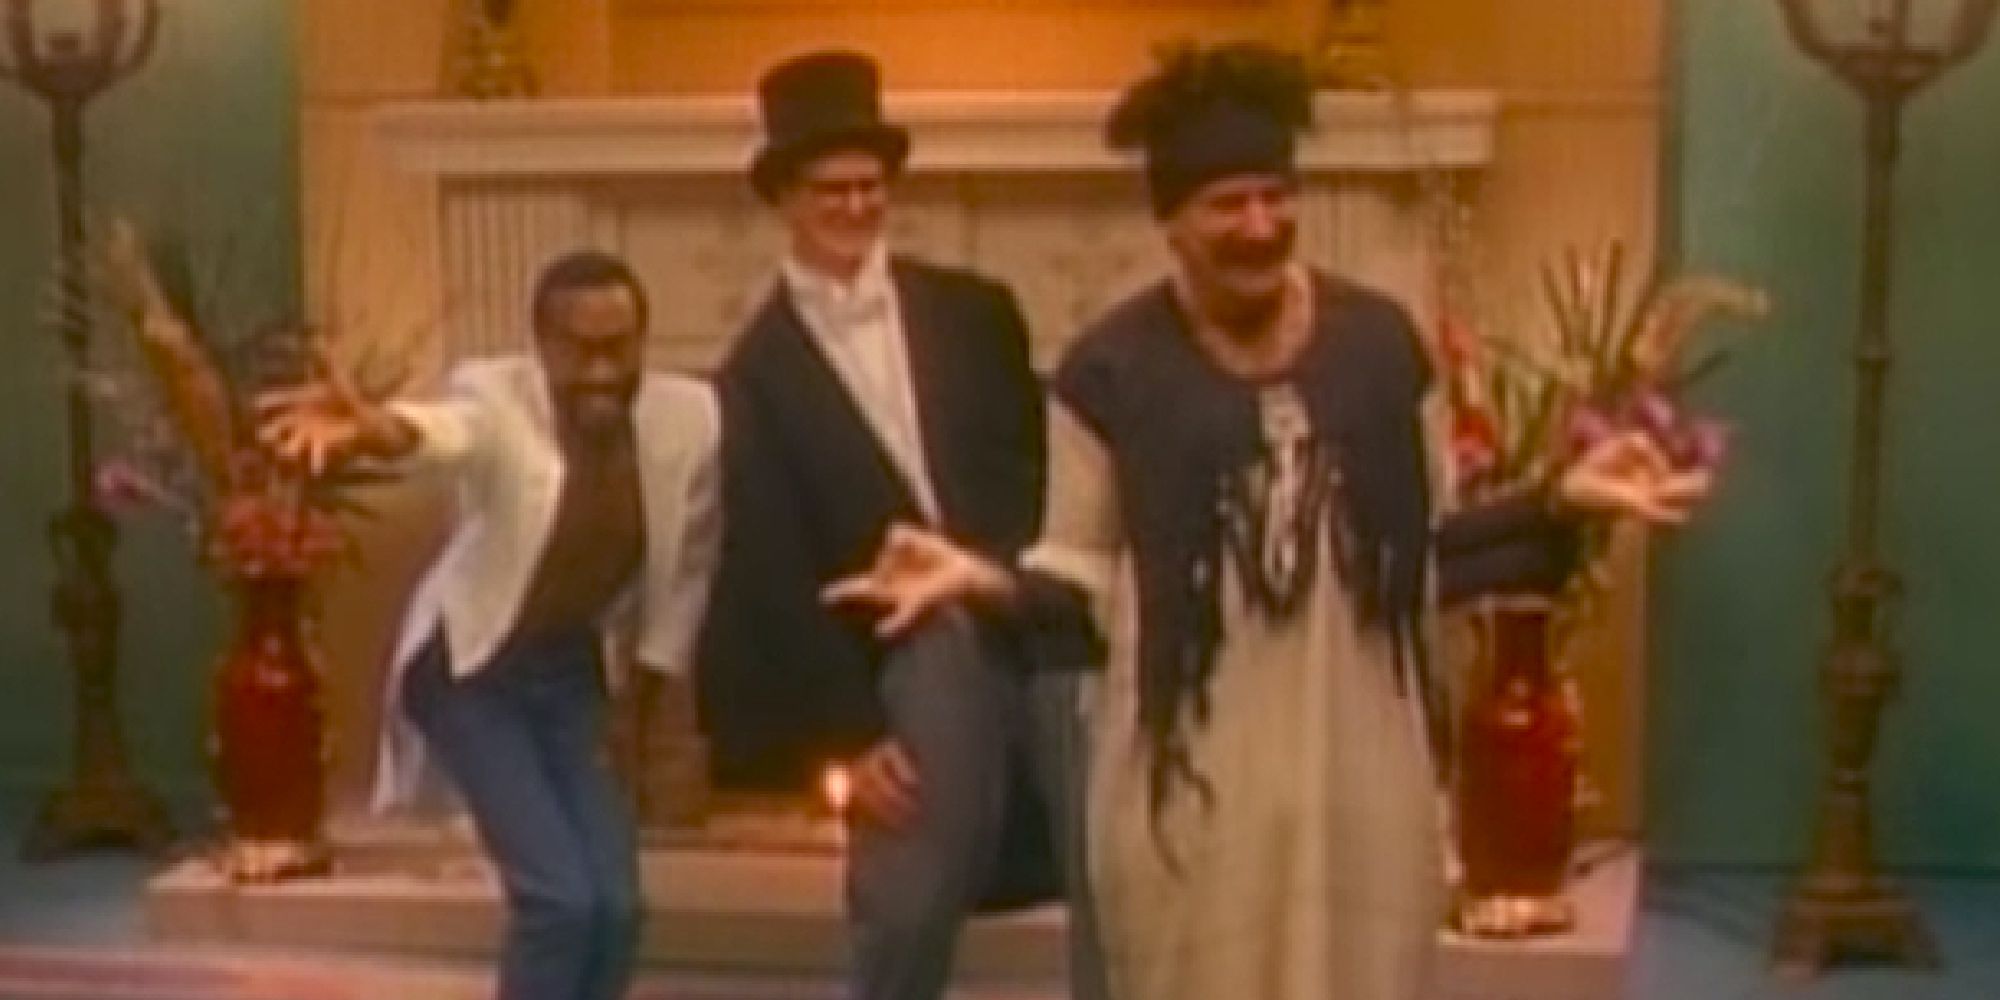 Bobby McFerrin, Bill Irwin, and Robin Williams dancing in the Don't Worry Be Happy video